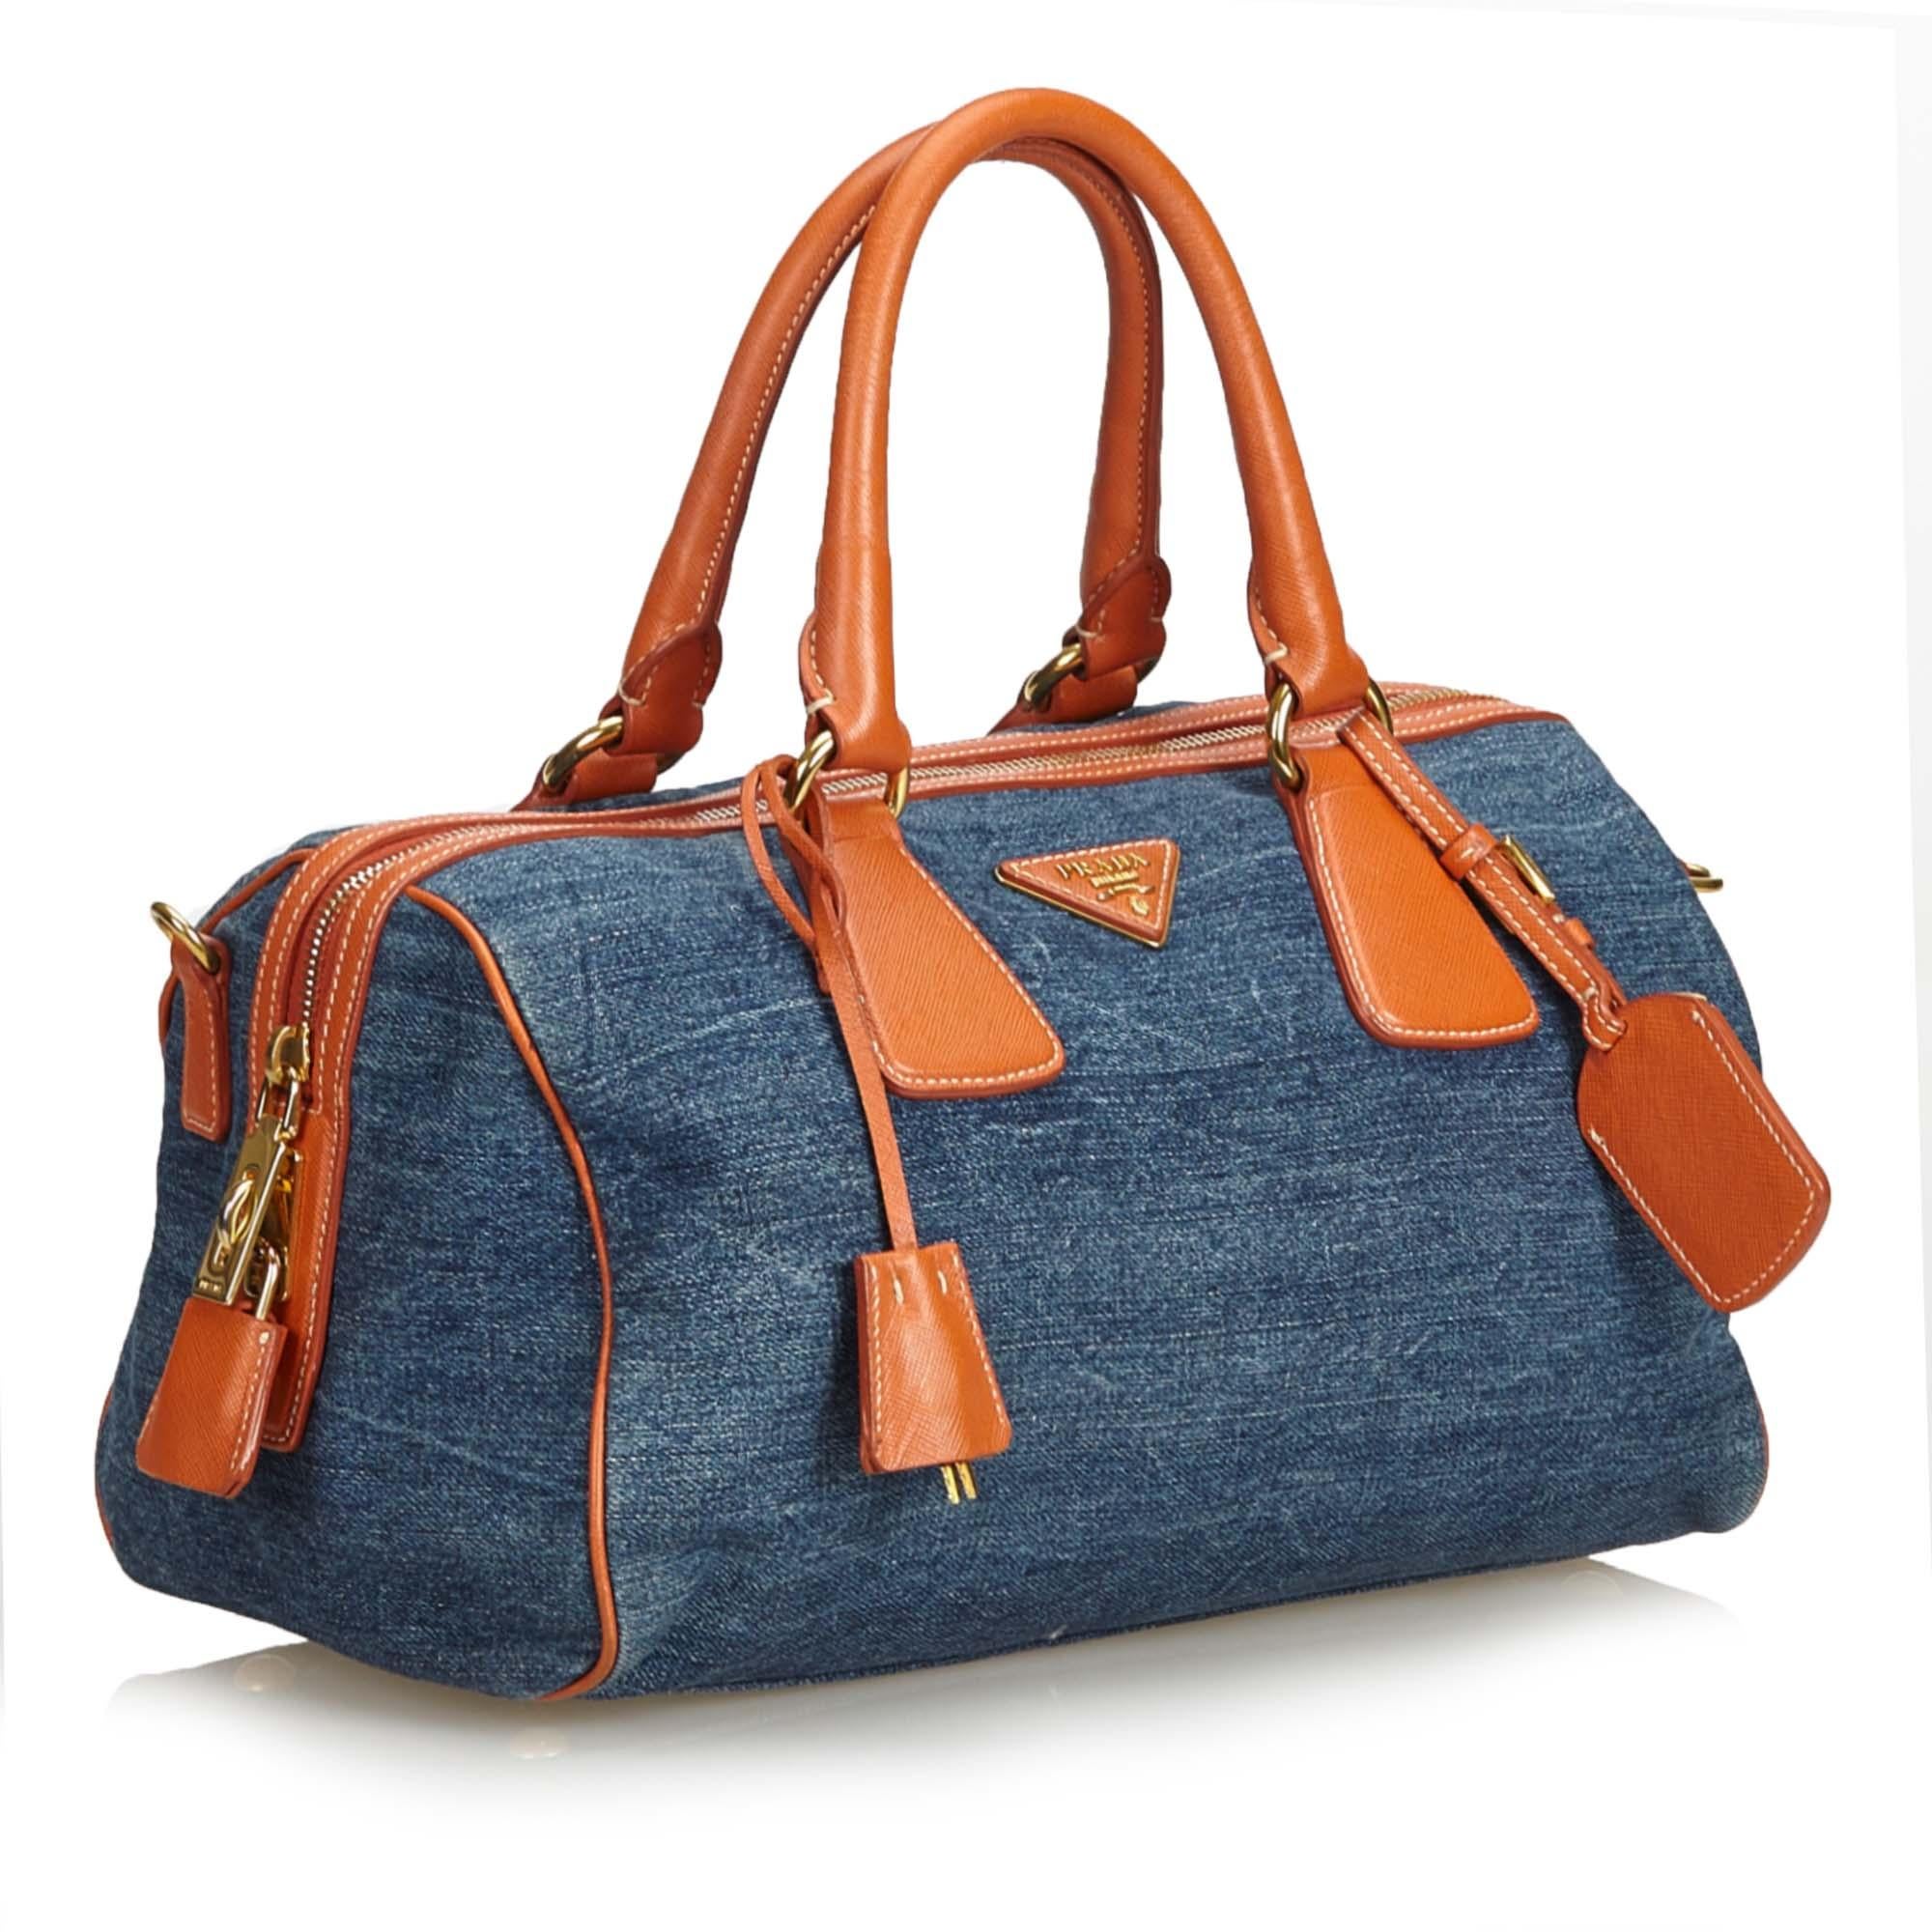 This satchel features a denim body with saffiano leather trim, rolled leather handles, top zip closure, and interior zip and slip pockets. It carries as B+ condition rating.

Inclusions: 
Authenticity Card

Dimensions:
Length: 18.00 cm
Width: 31.00